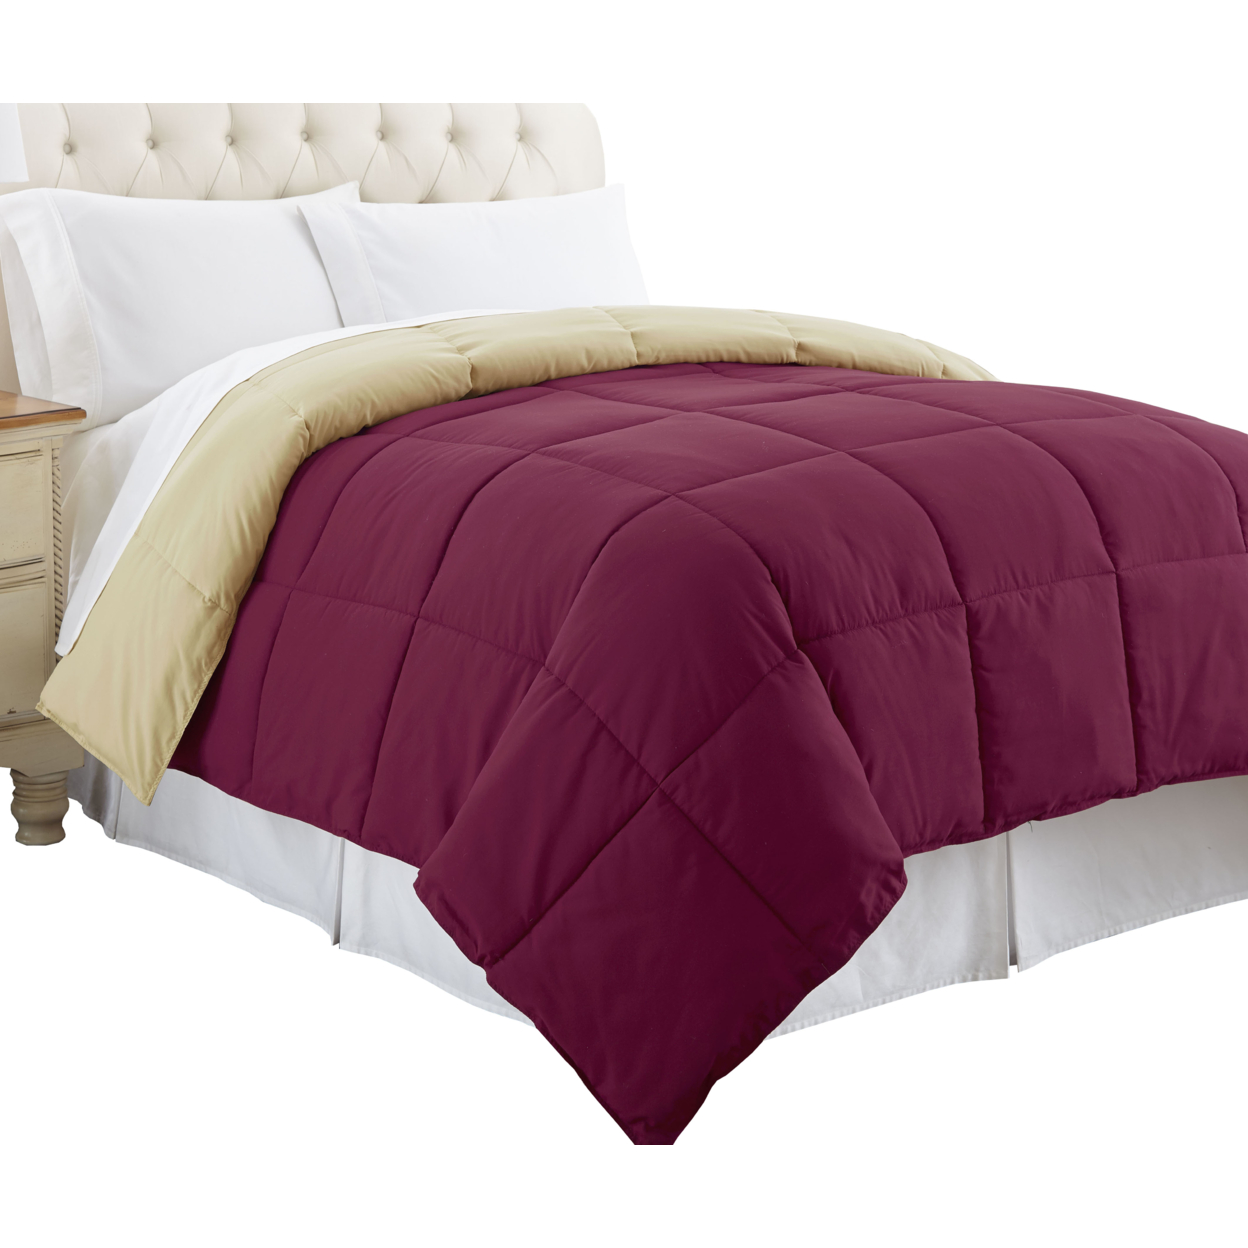 Genoa King Size Box Quilted Reversible Comforter The Urban Port, Pink And Beige- Saltoro Sherpi